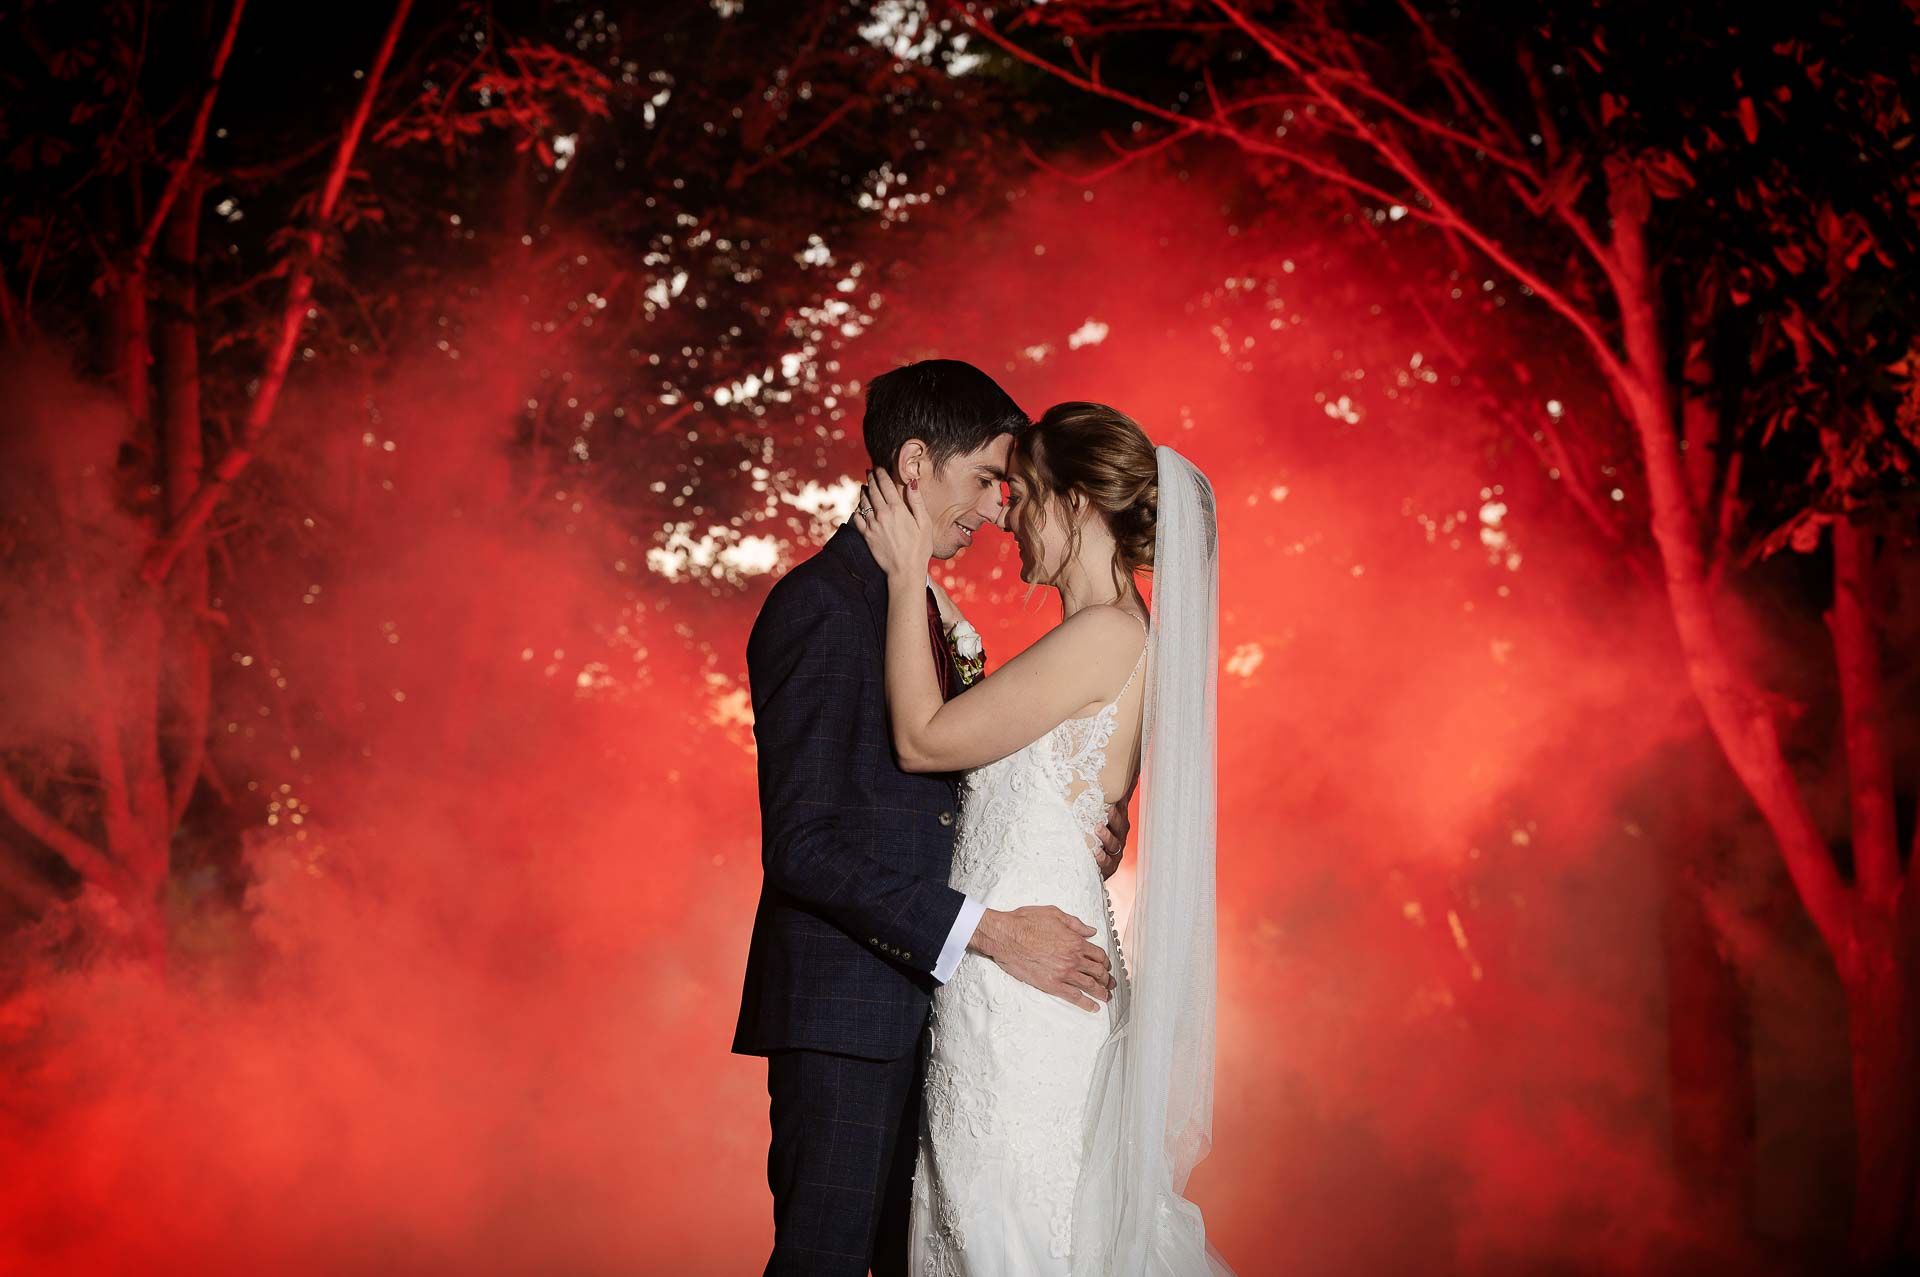 A photo amongst trees with red flash making a smoke bomb look red circulating Ross and Sophie during sunset at Swynford Manor. Photography by Fountain Photography. Videography by Veiled Productions.